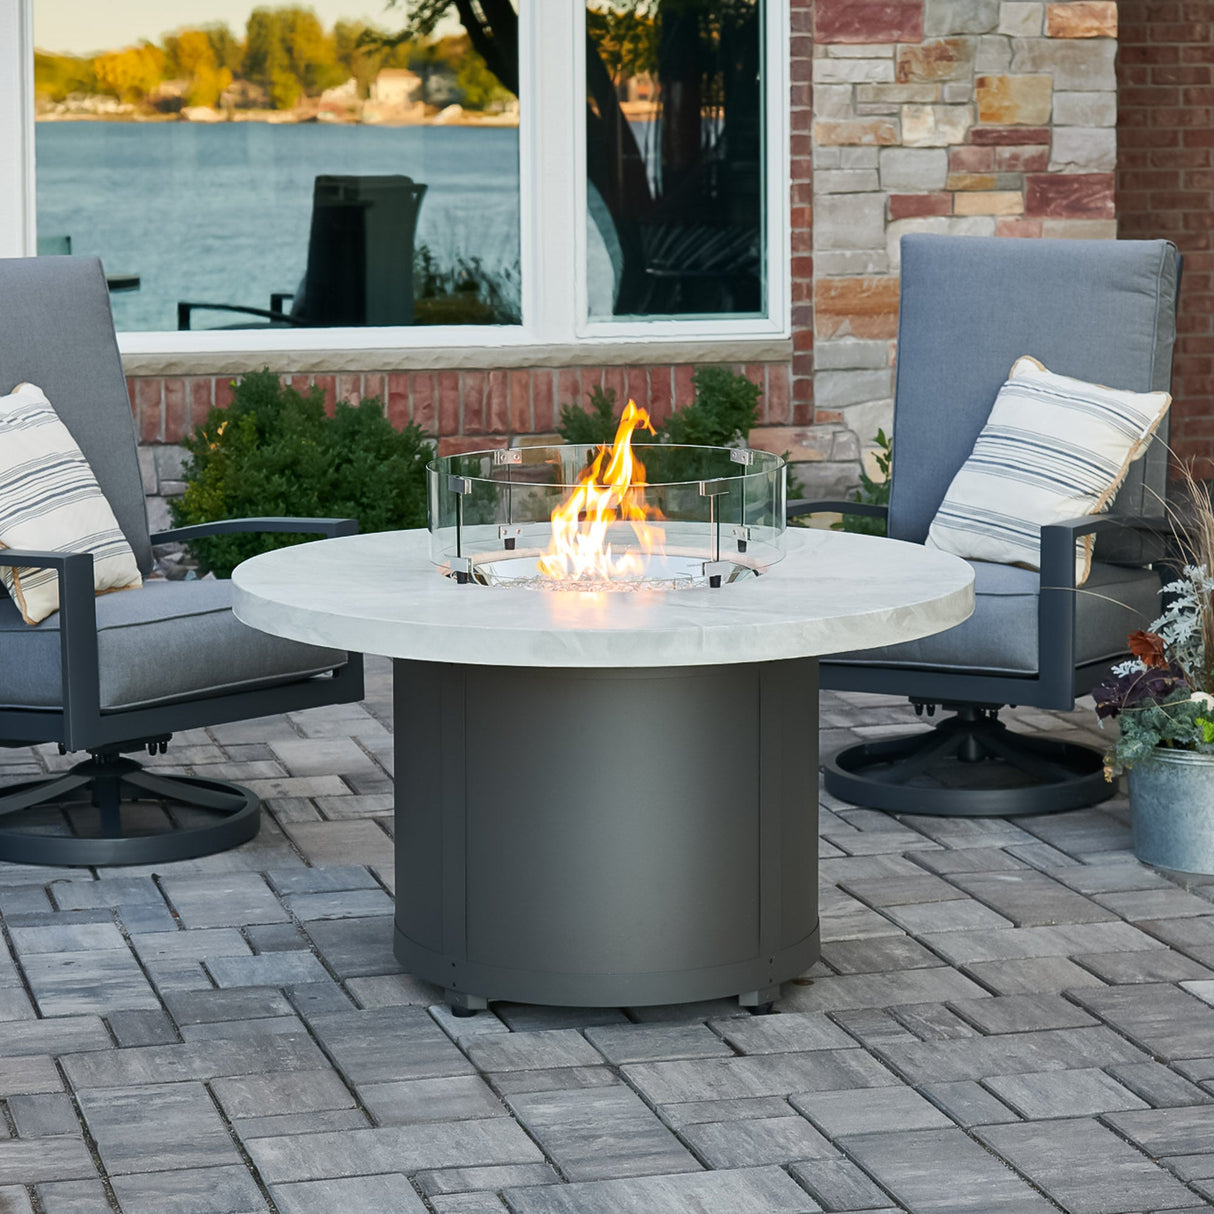 The White Onyx Beacon Round Gas Fire Pit Table with a round glass wind guard being used to protect the flame